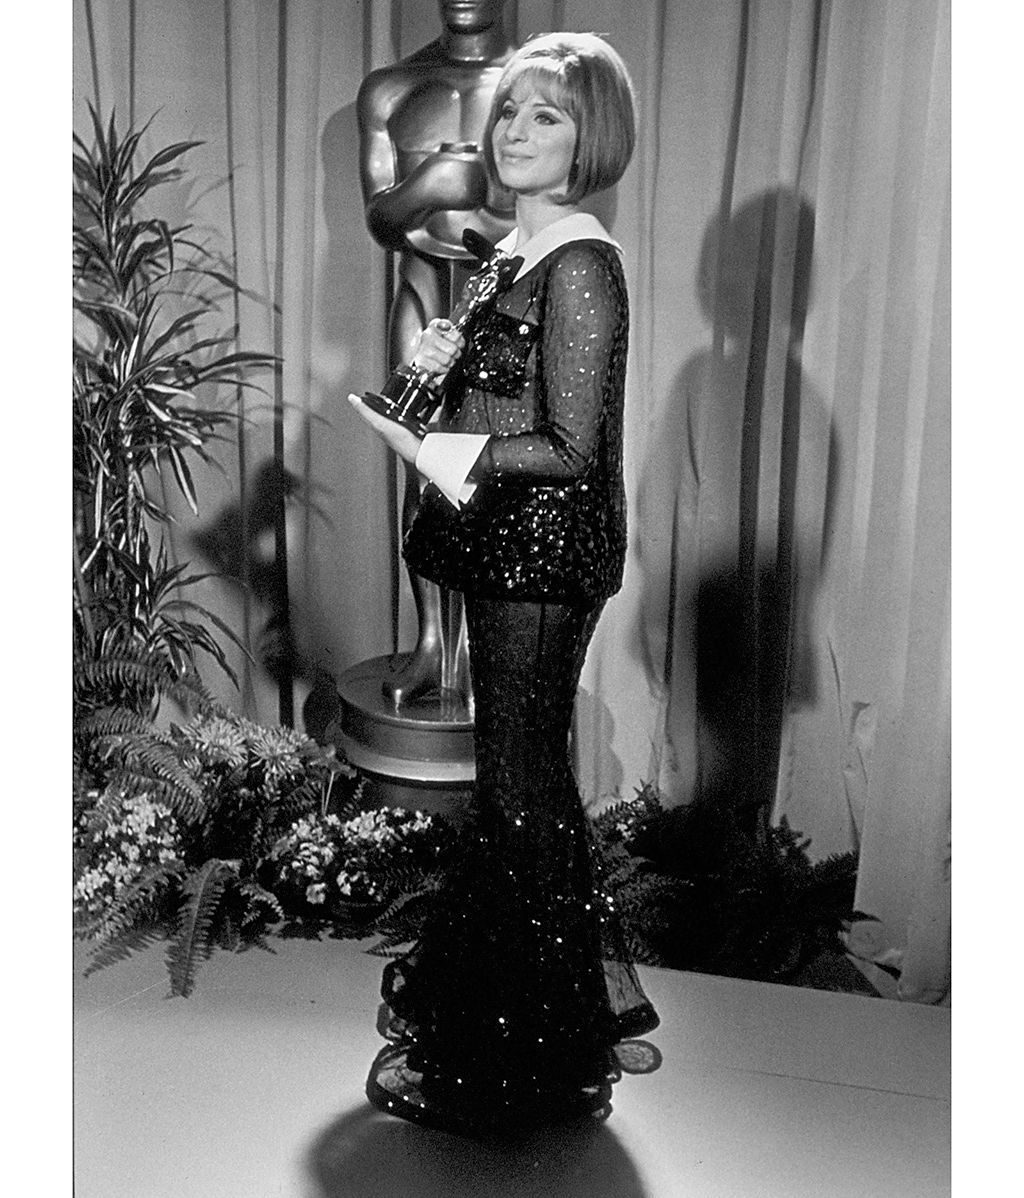 "Academy Awards: 41st Annual,"
Barbra Streisand wearing a see-through sequined Scaasi pantsuit
1969 © 1978 Bud Gray